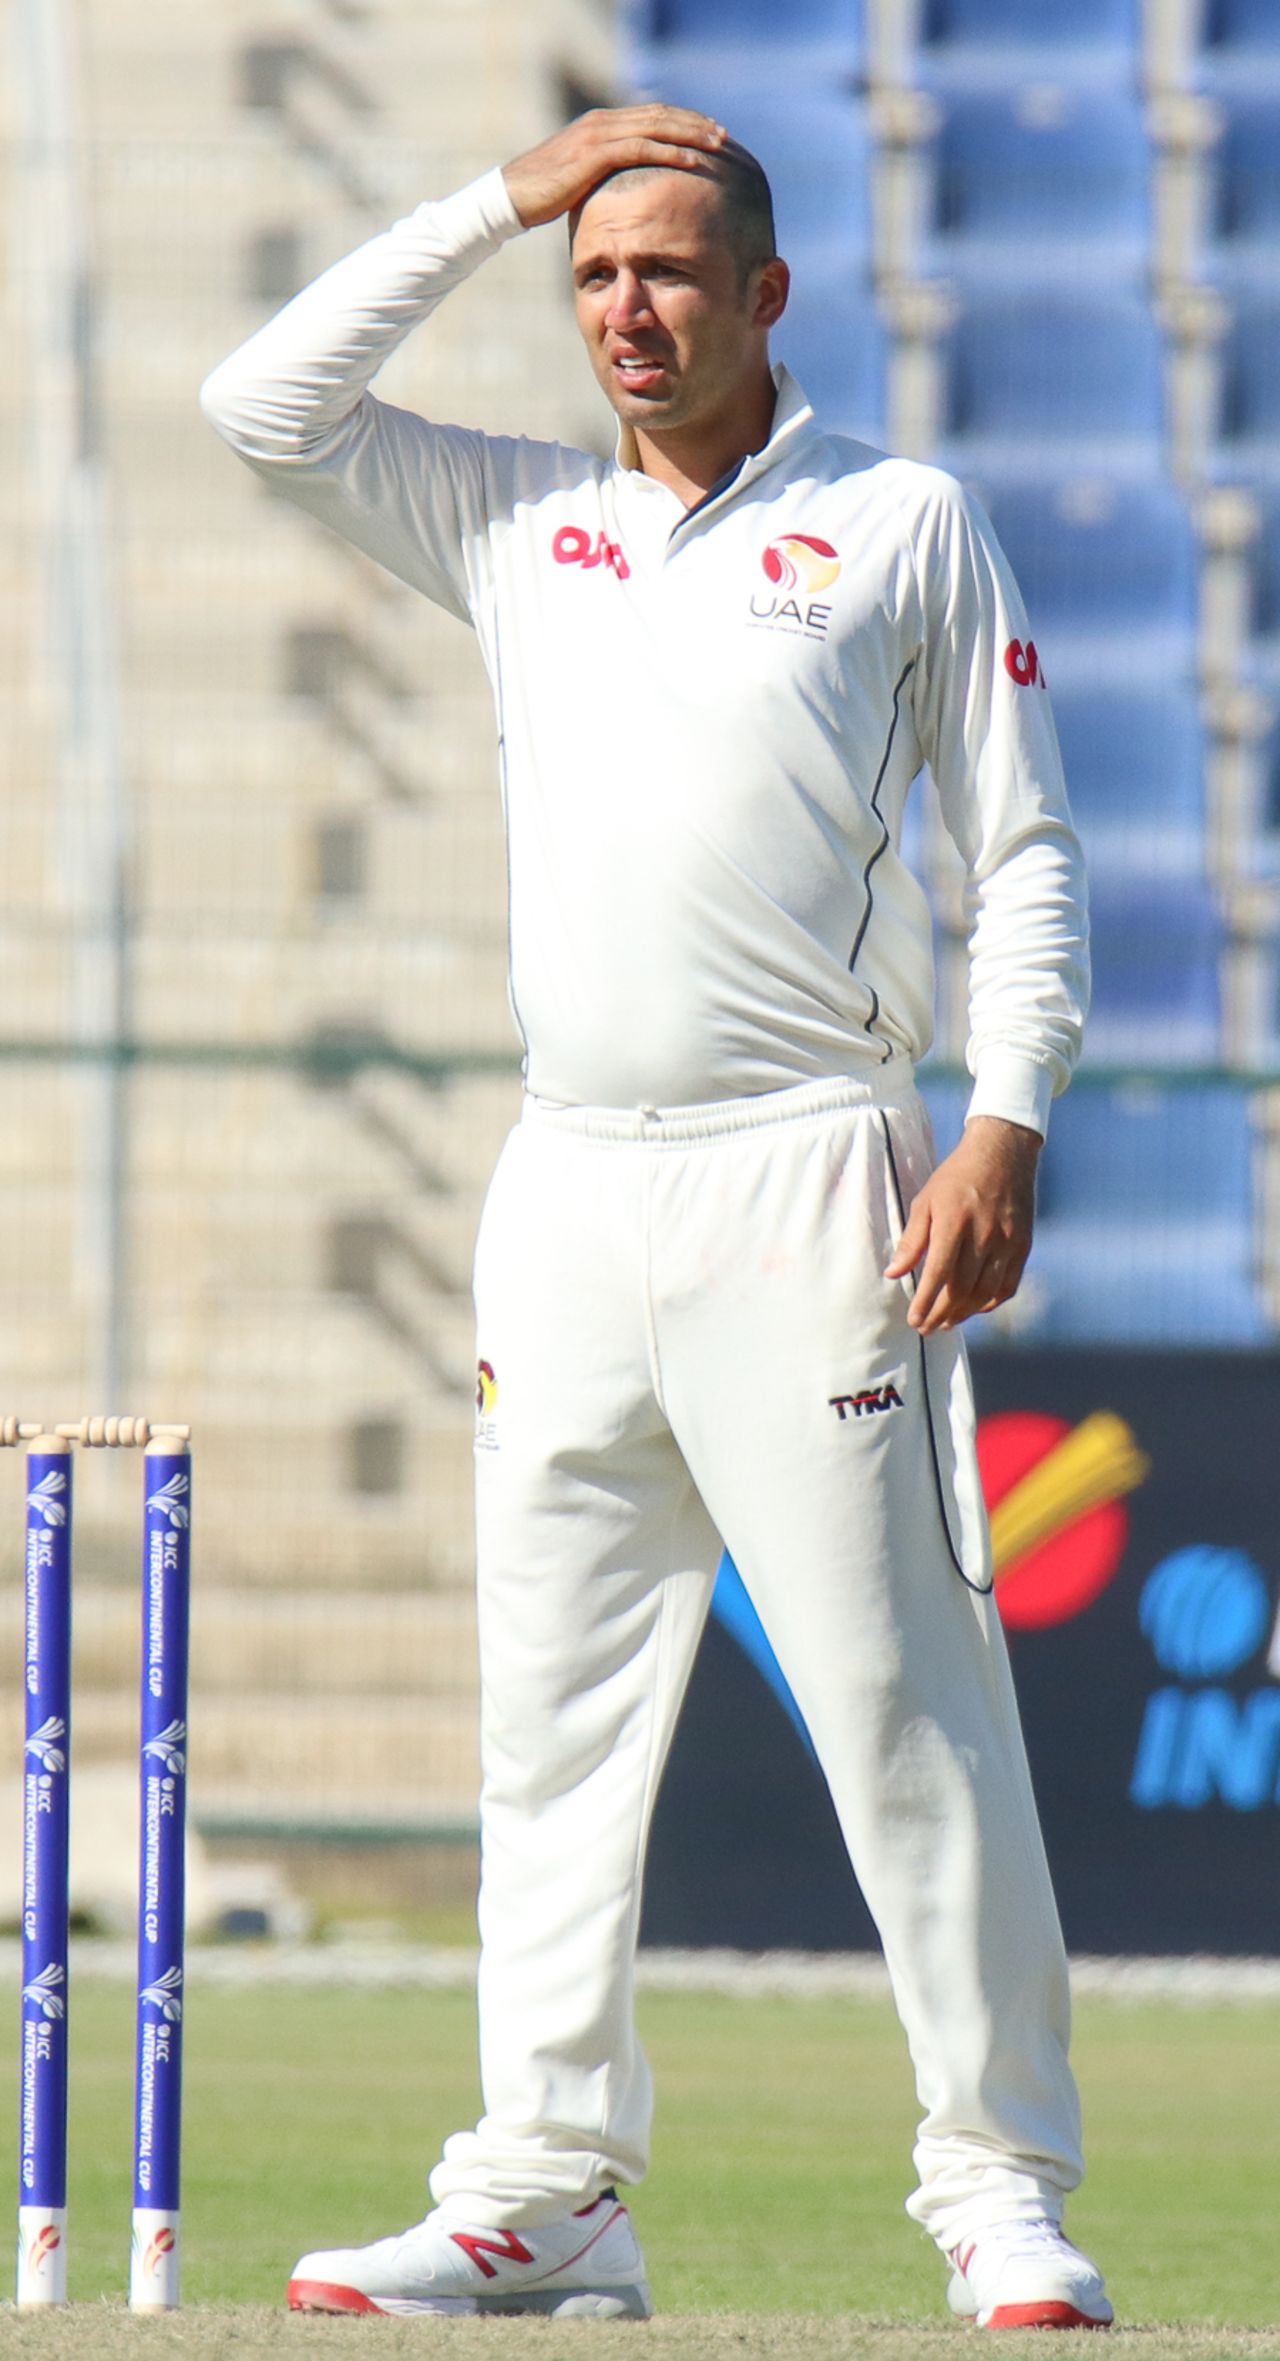 UAE captain Rohan Mustafa struggles to find a solution to stem Afghanistan's flow of runs, UAE v Afghanistan, 2015-17 Intercontinental Cup, 1st day, Abu Dhabi, November 29, 2017